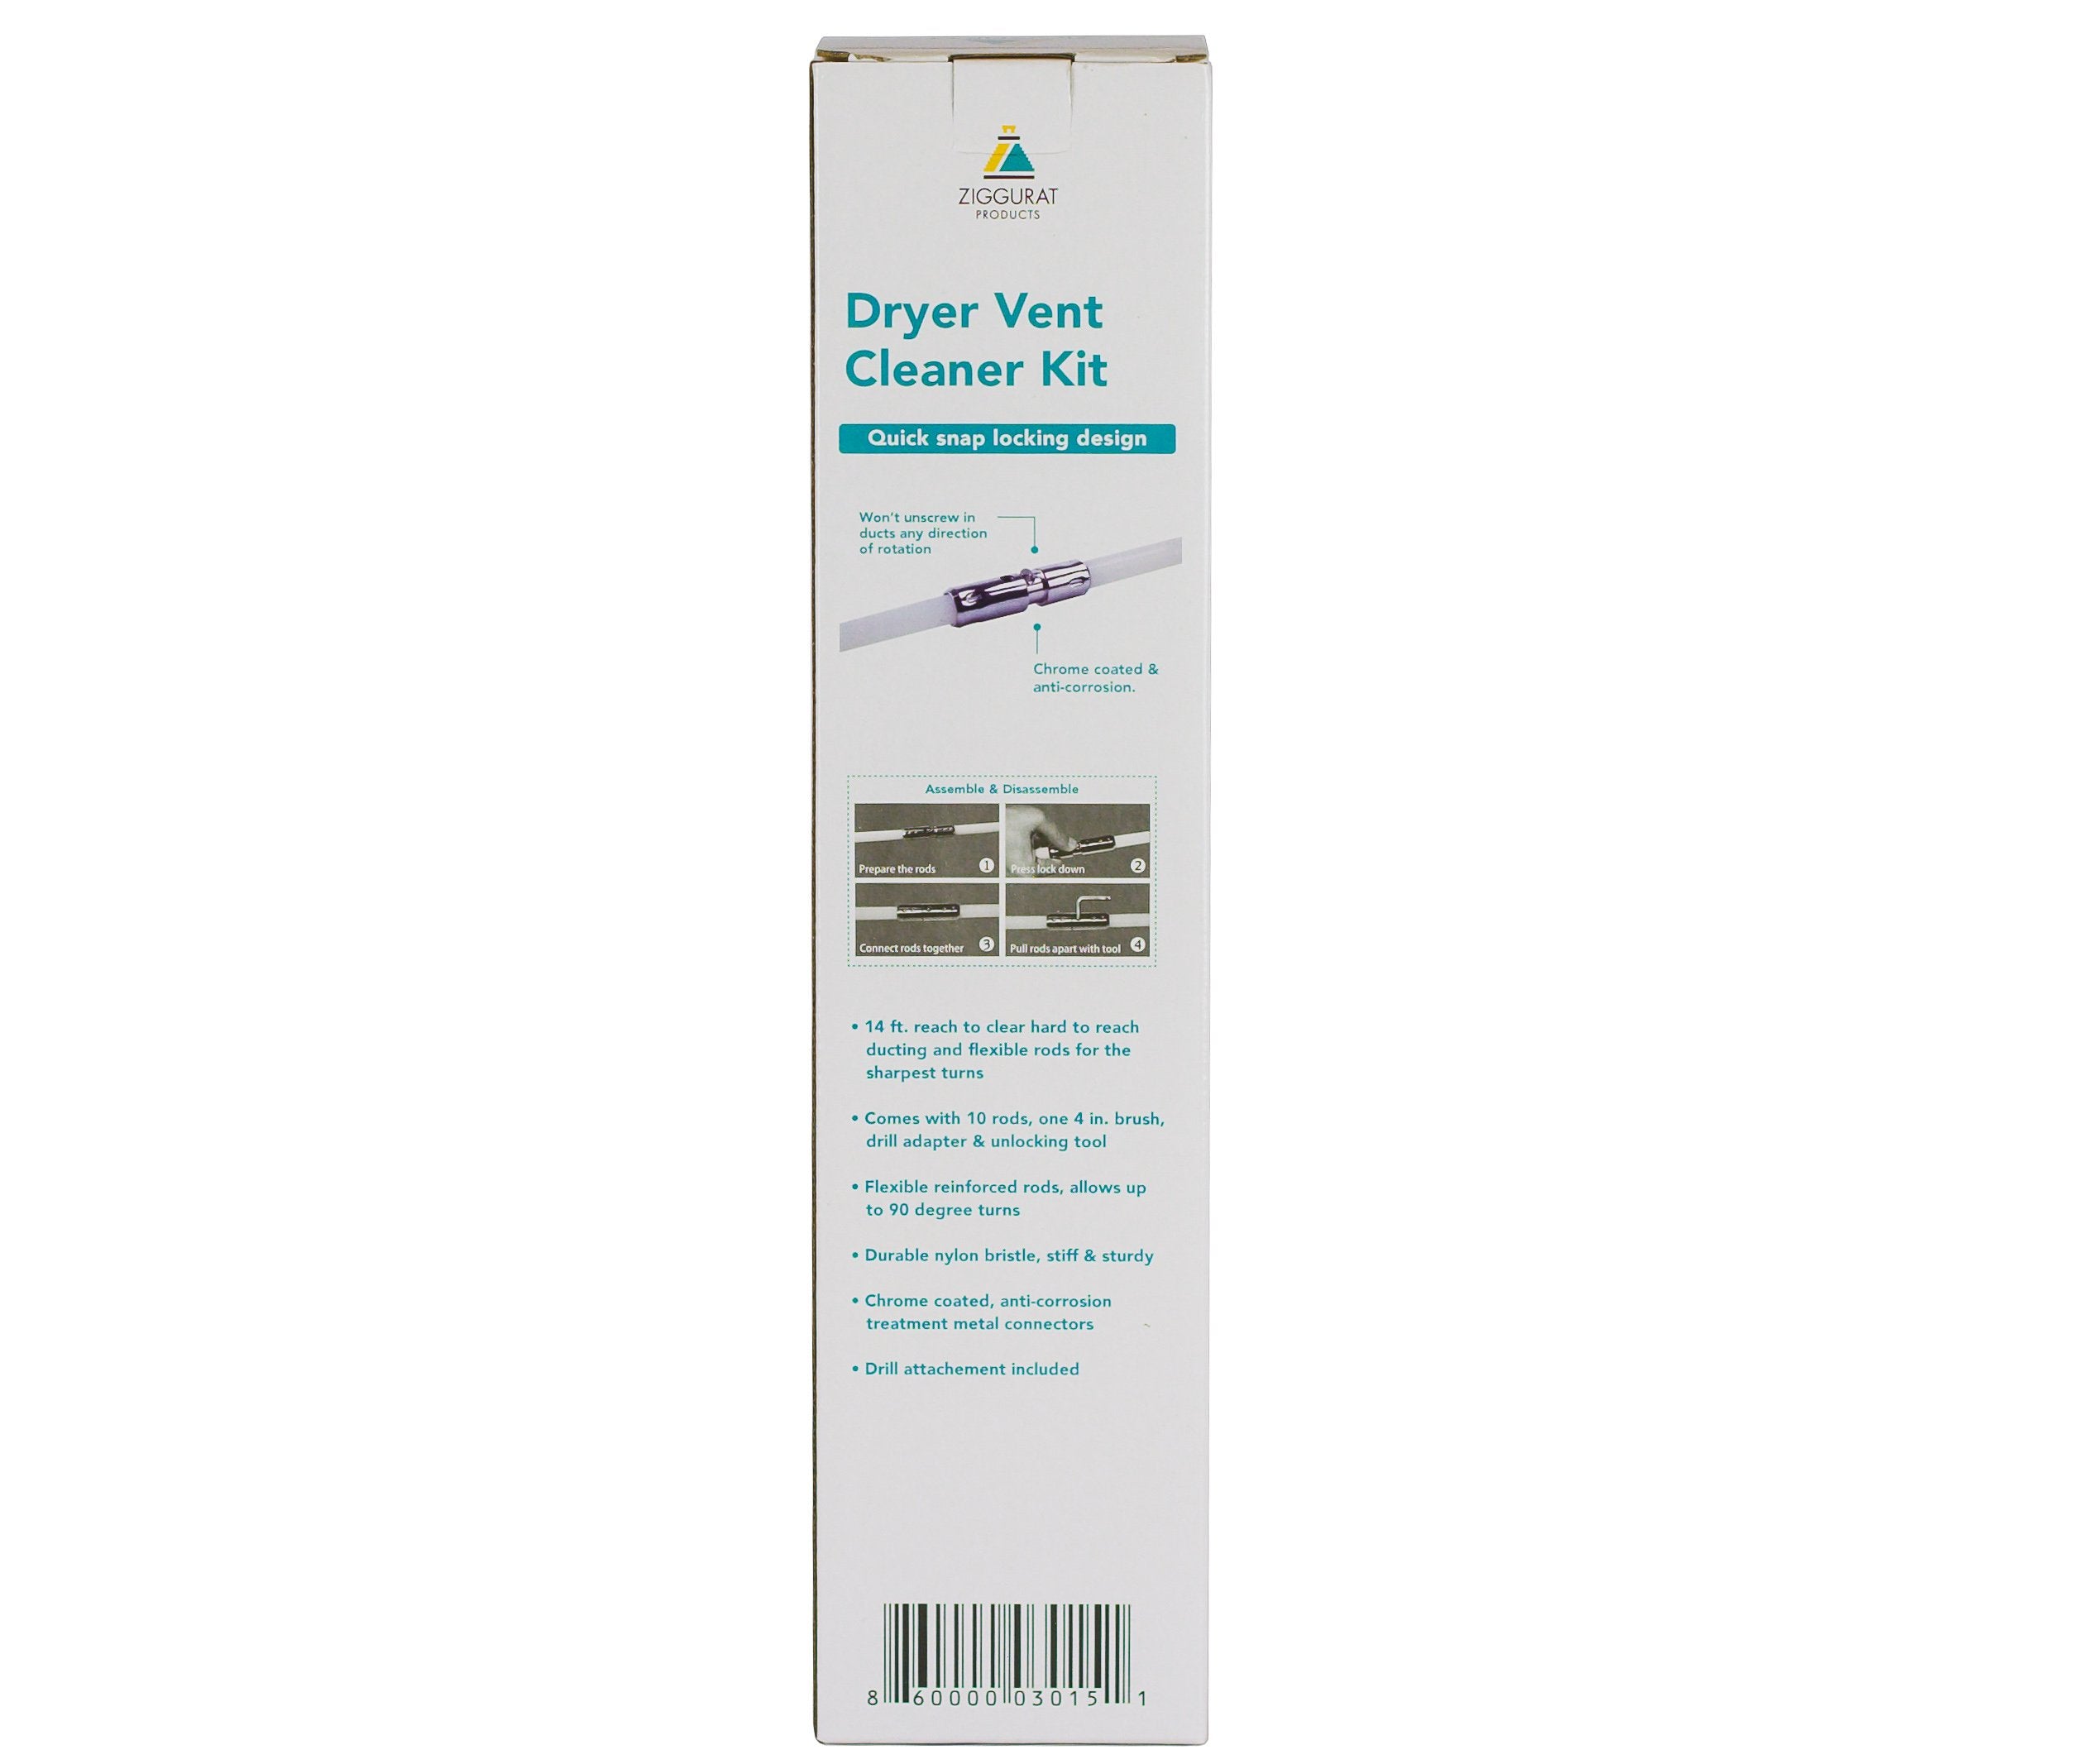 Snap To Vent Dryer Vent Cleaning Kit